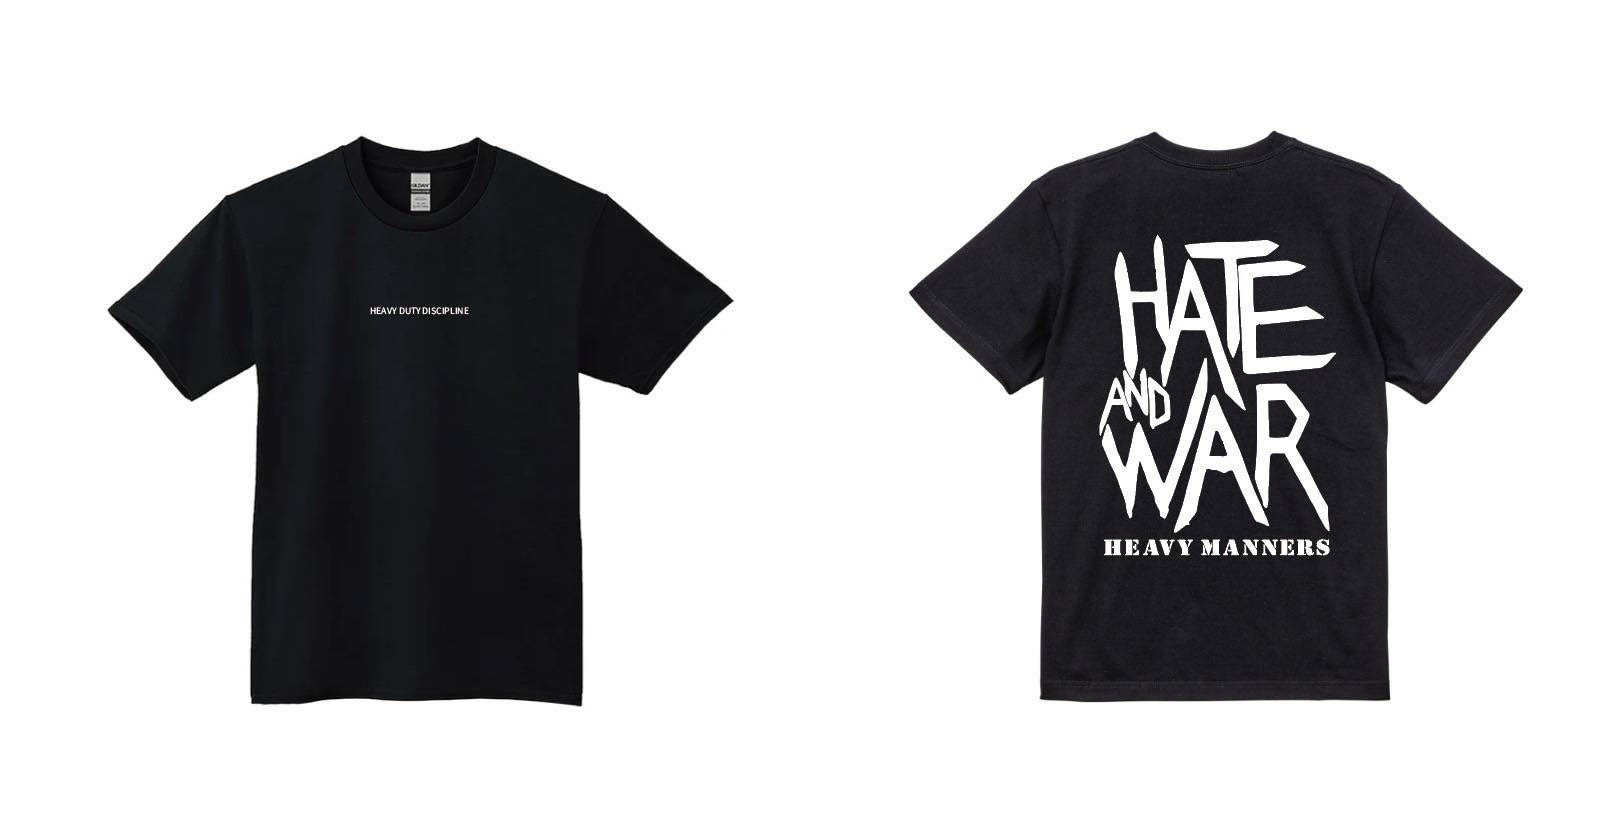 HATE AND WAR TEE (BK)